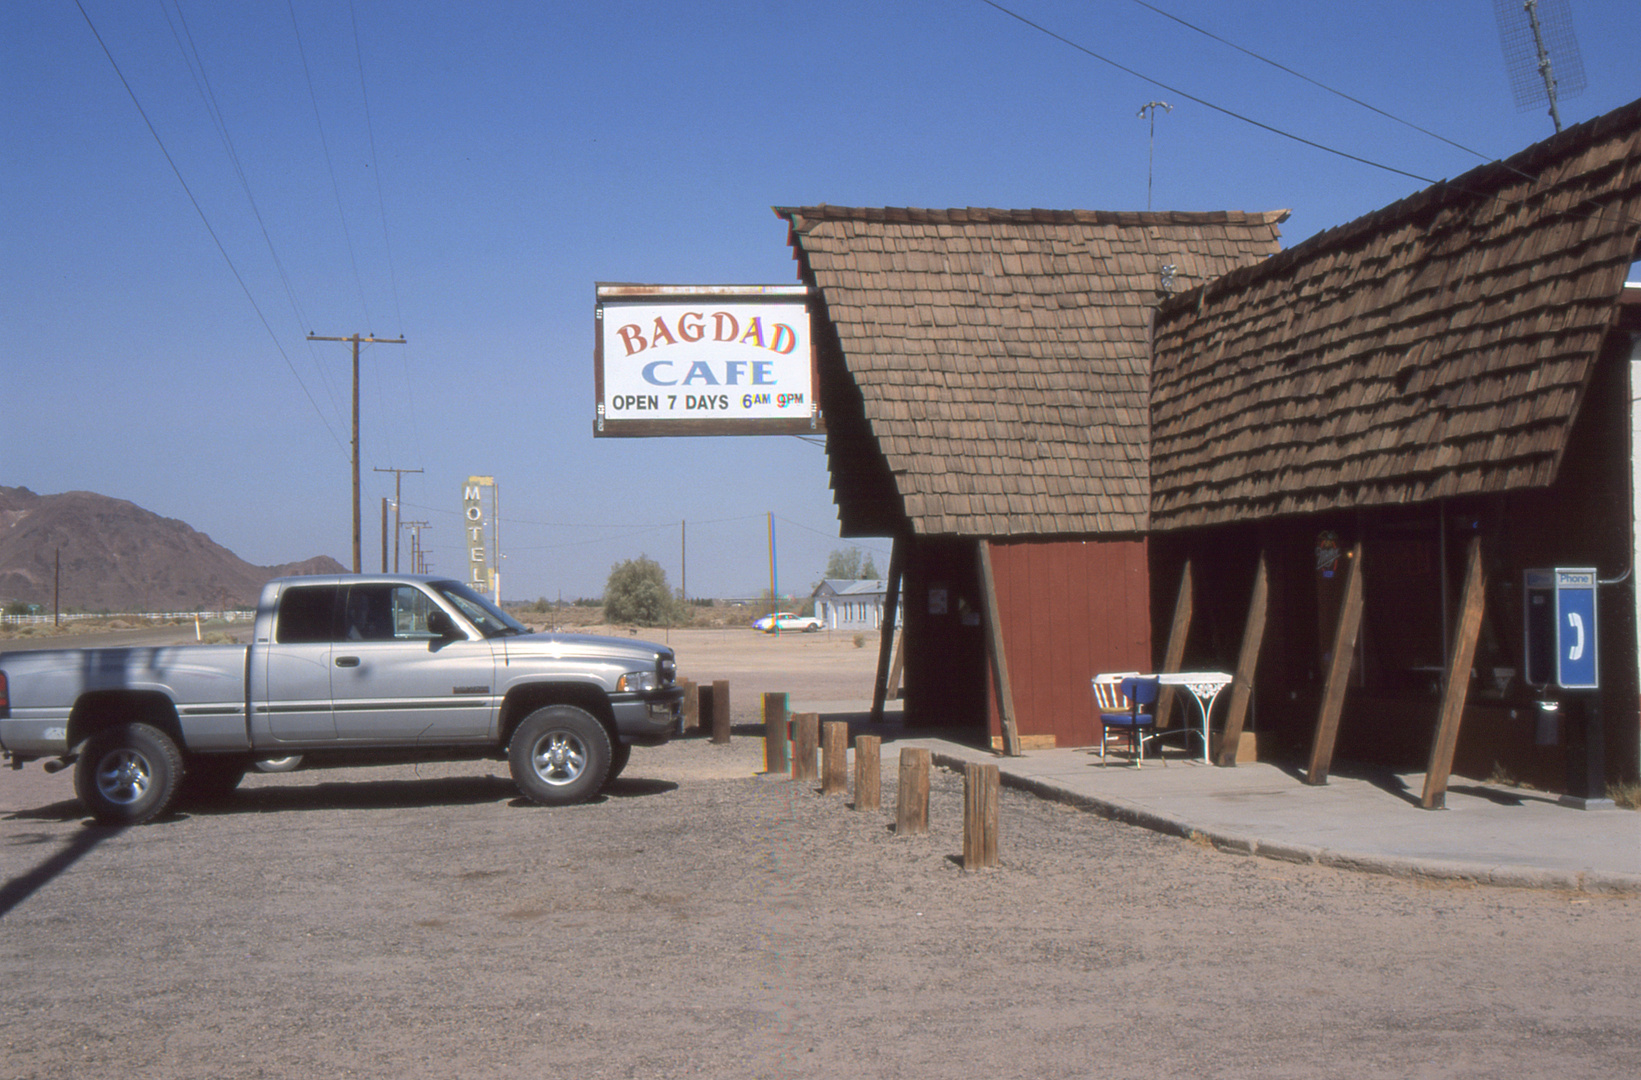 Route 66: Bagdad Cafe in Newberry Springs - California 